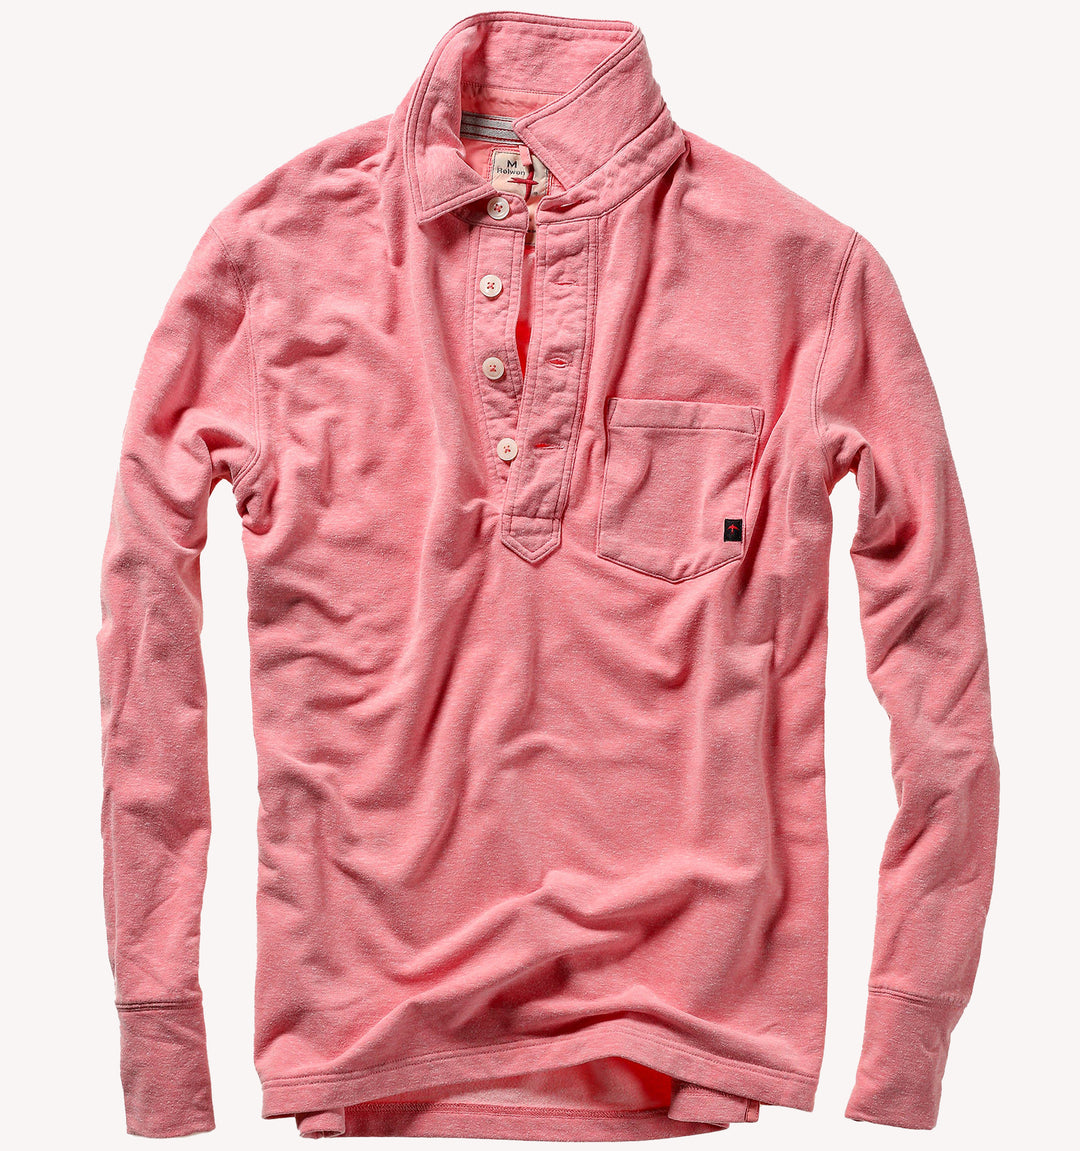 Relwen Loopback Polo in Pink Heather